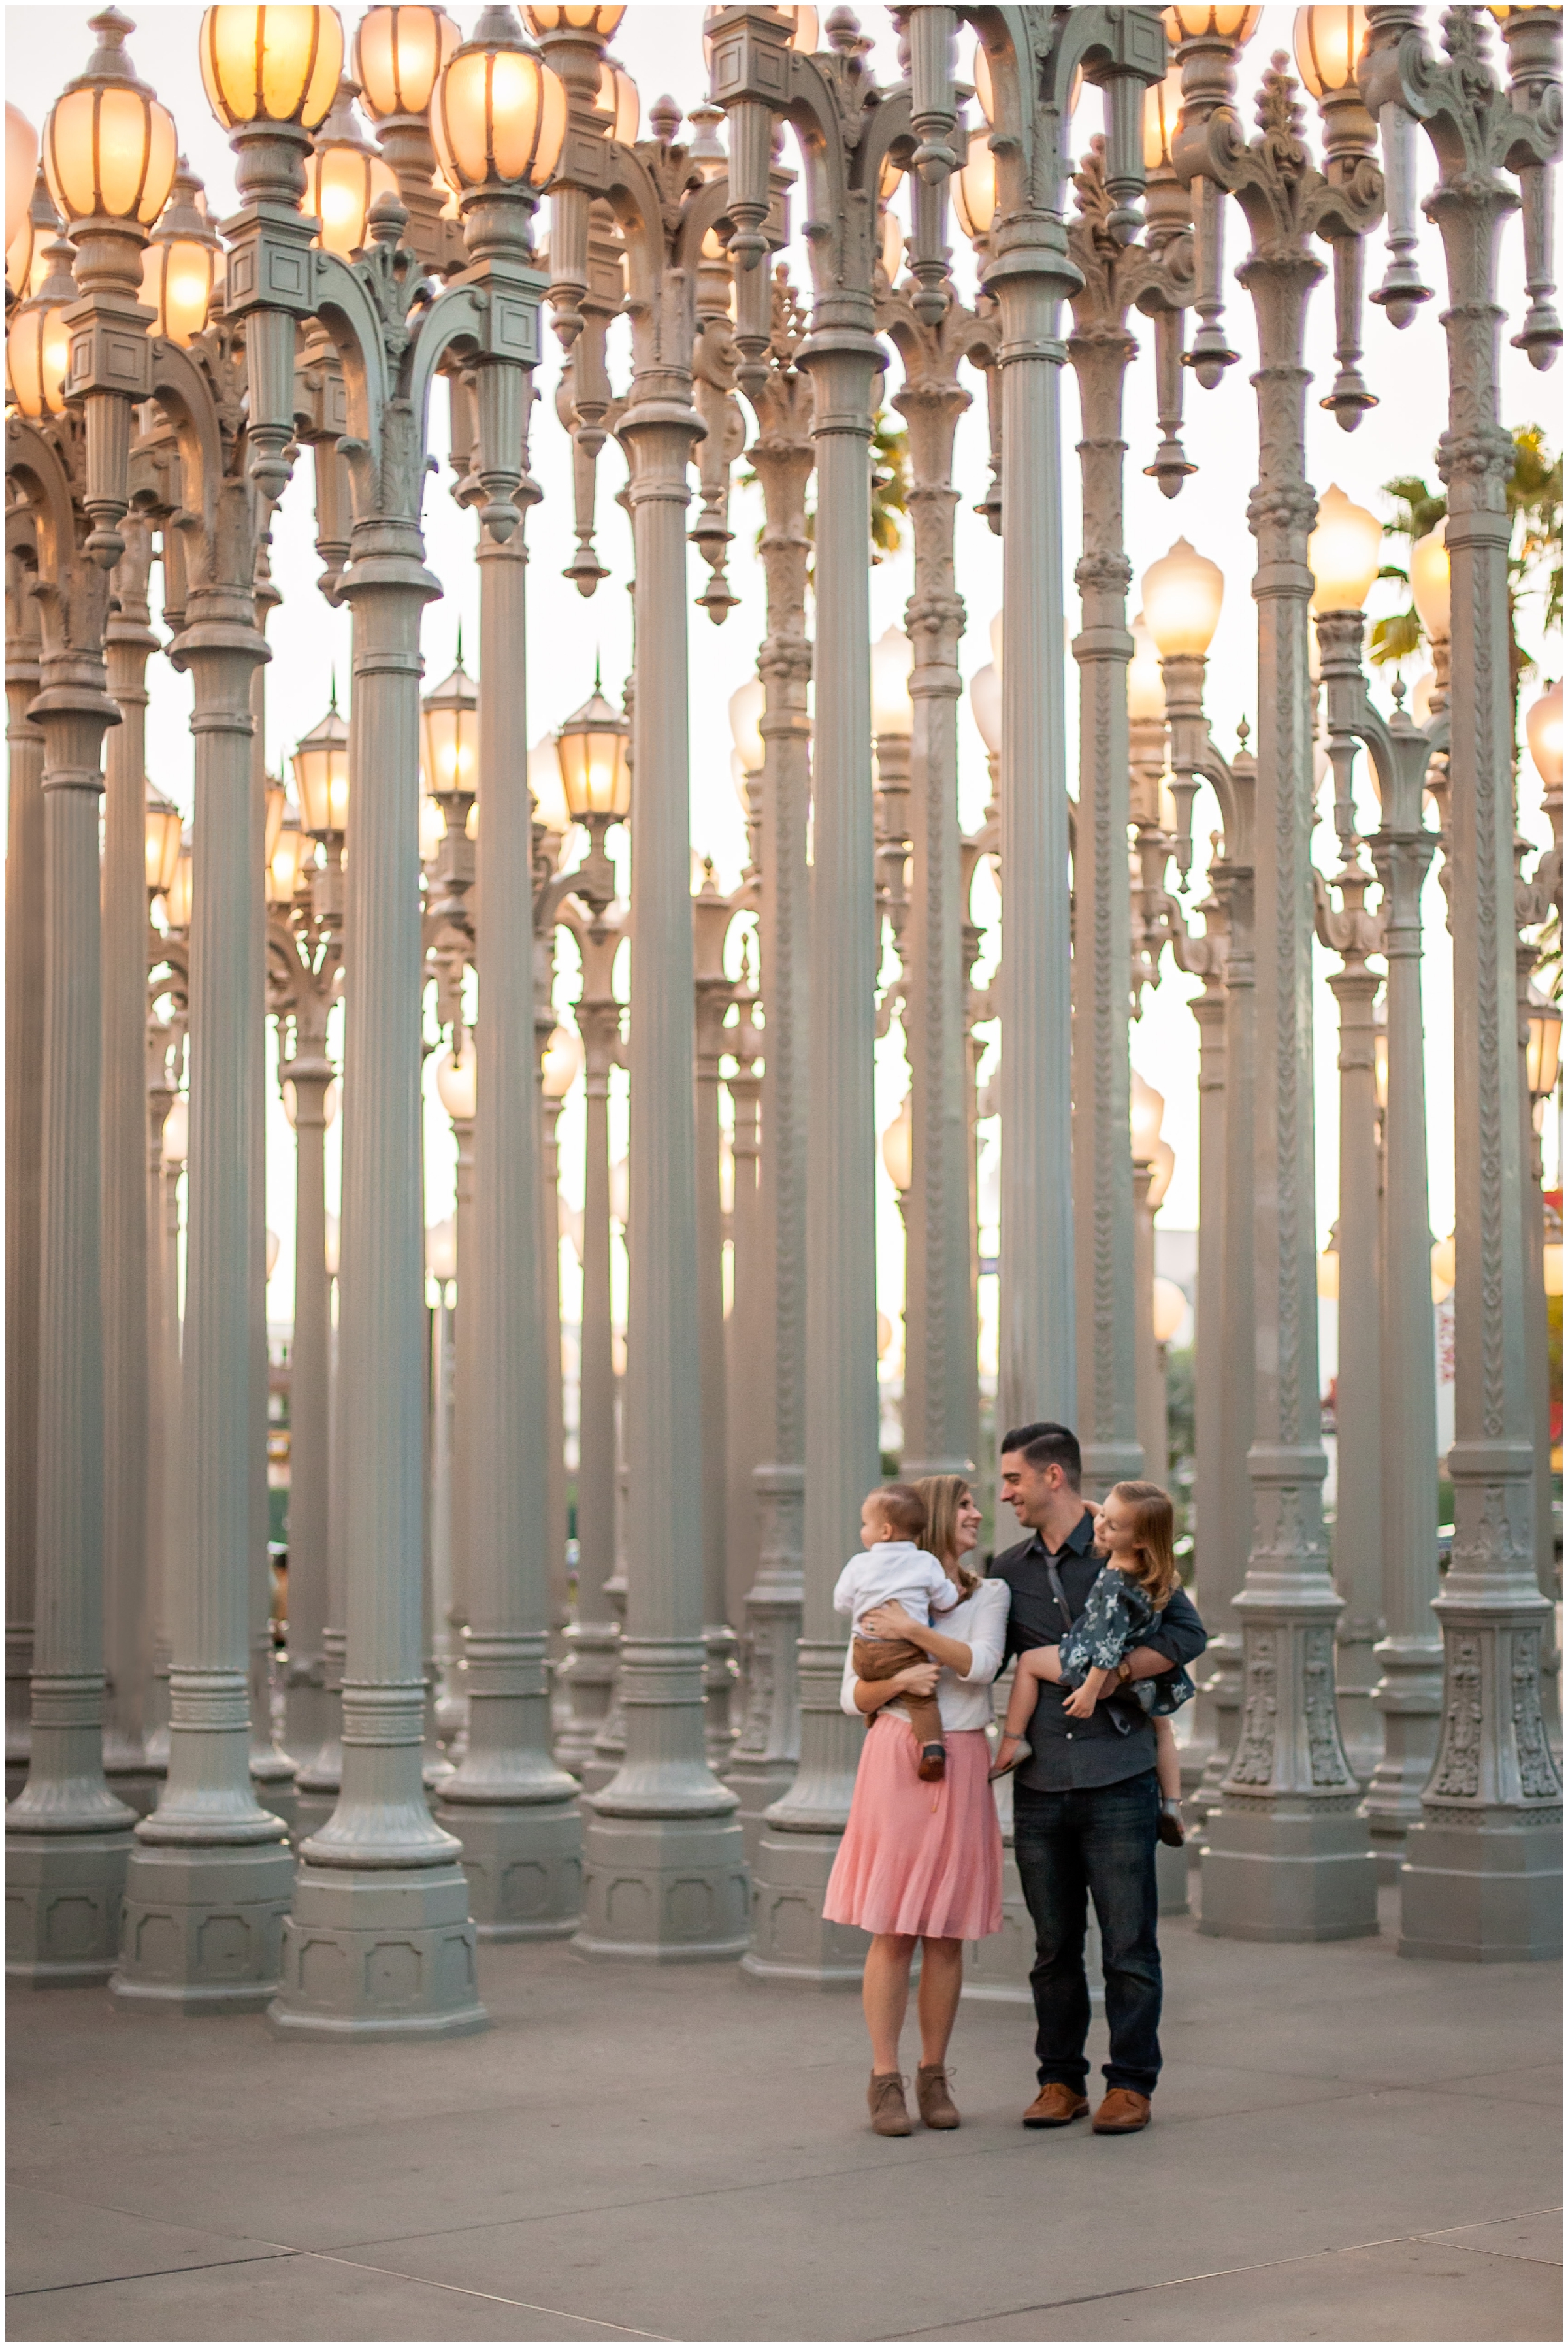 Brentwood Family Portrait - Los Angeles based photo studio, The